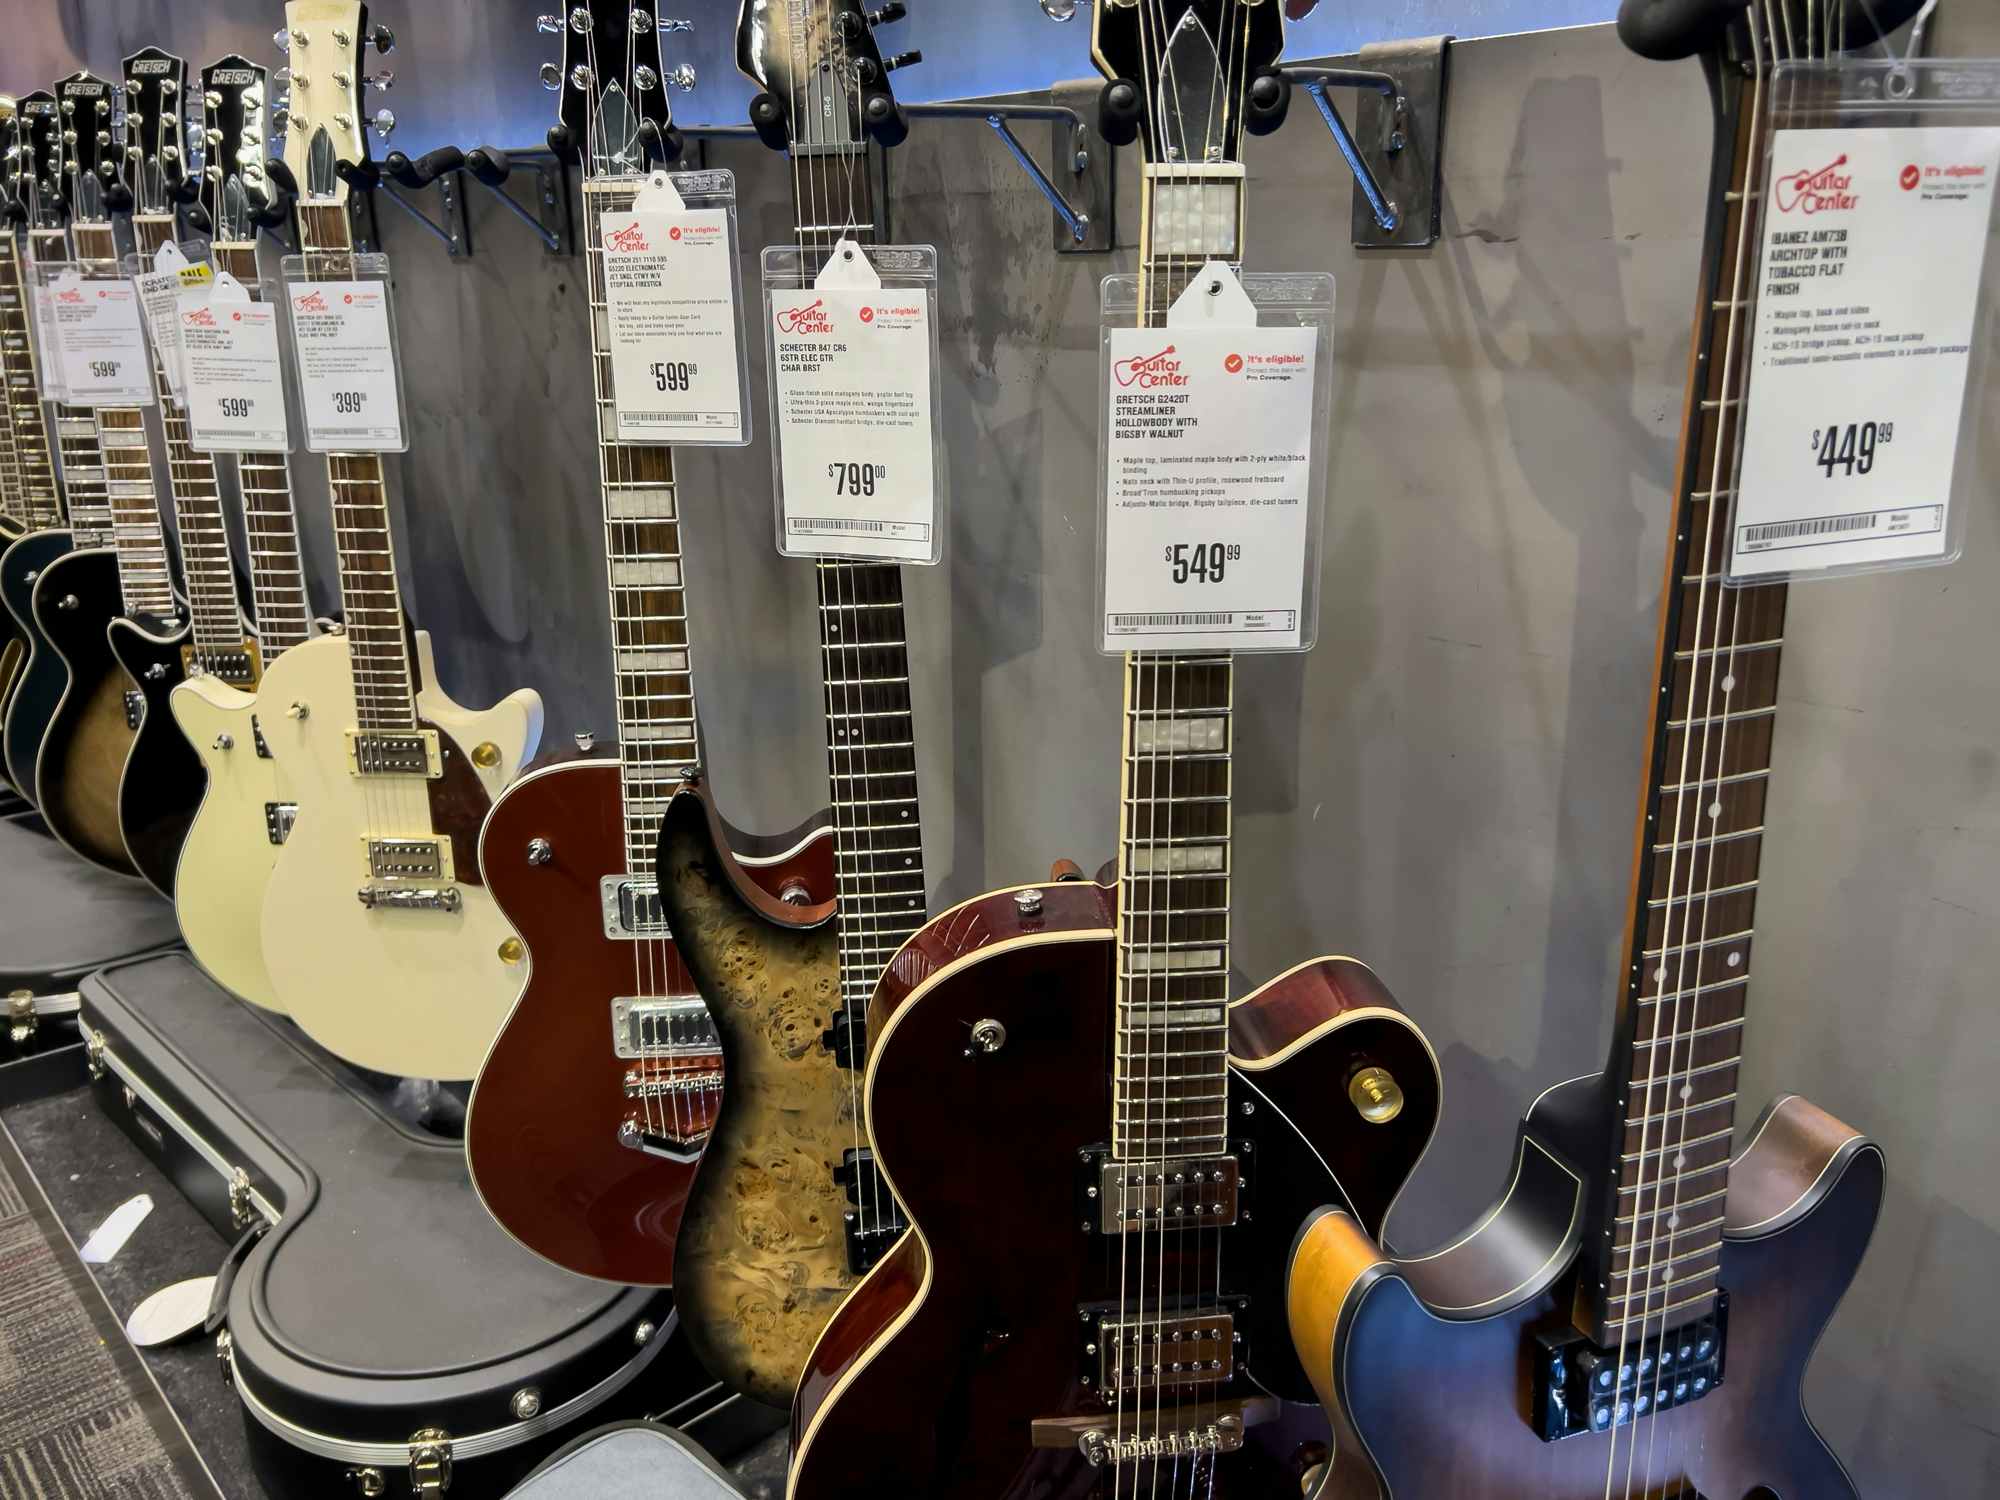 guitars lined up inside of the guitar store